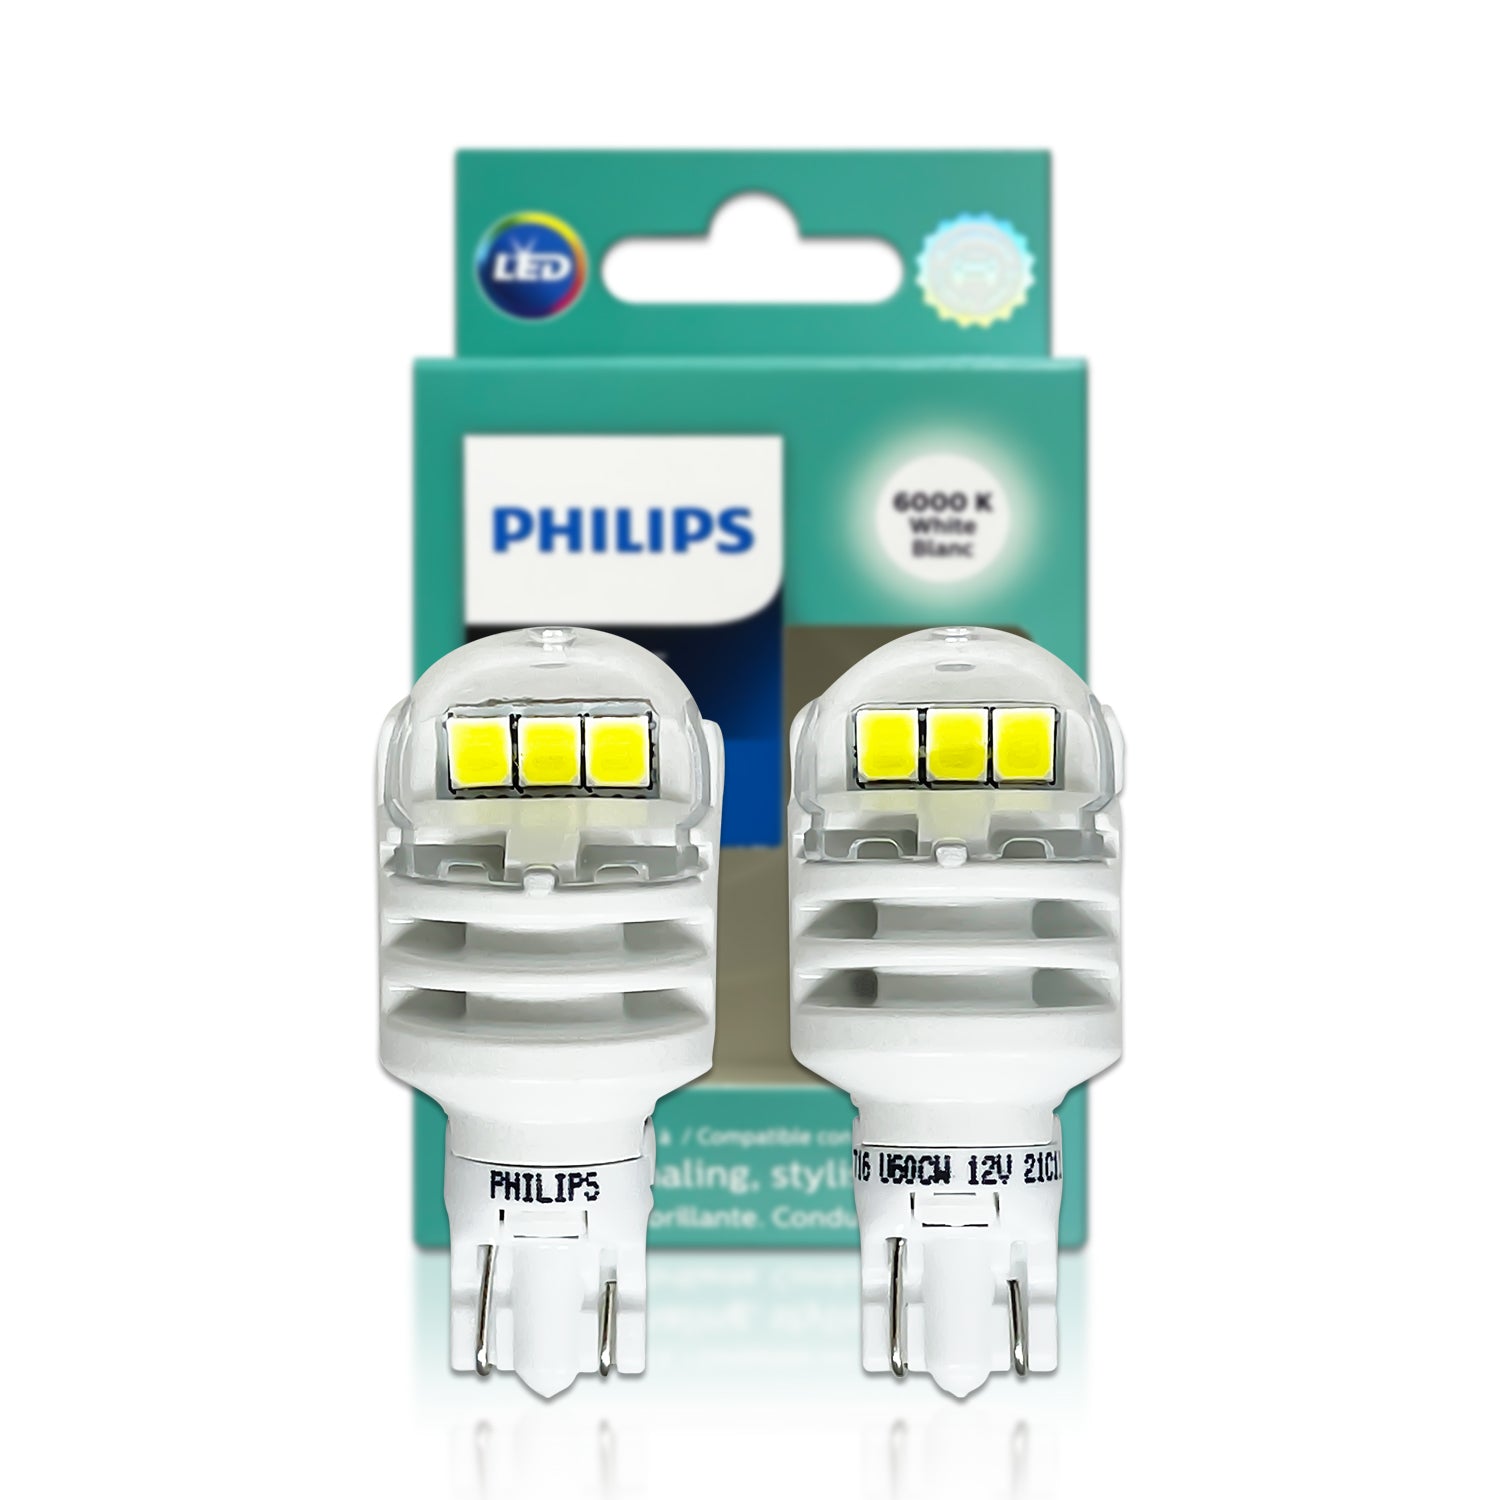 921 T16: Philips 921ULWX2 Ultinon White LED Bulbs – HID CONCEPT